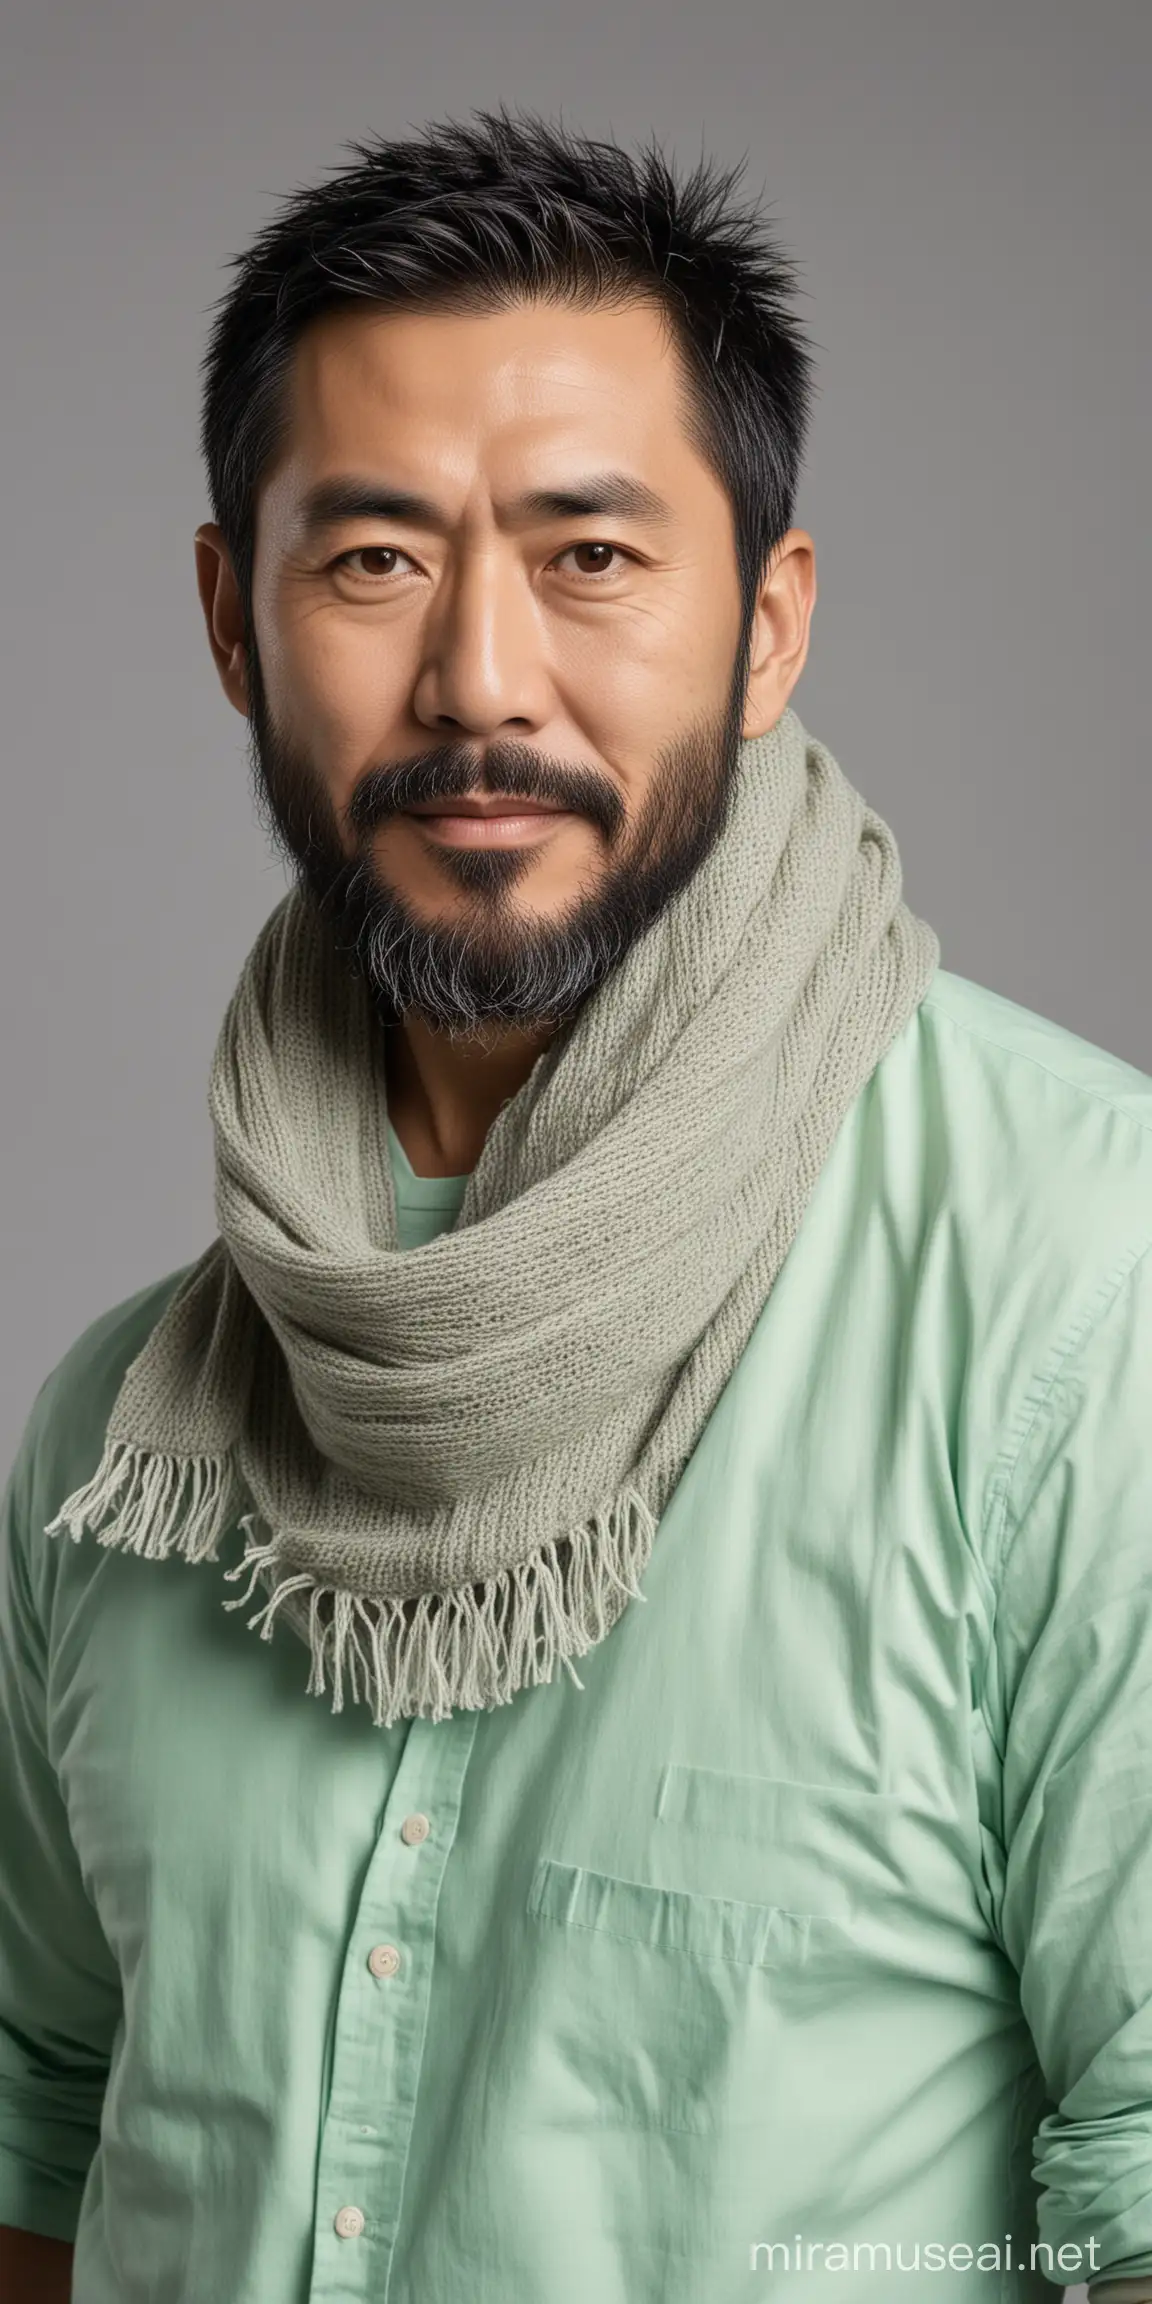 Muscular Japanese middle-aged male with beard wearing mint green shirt and scarf